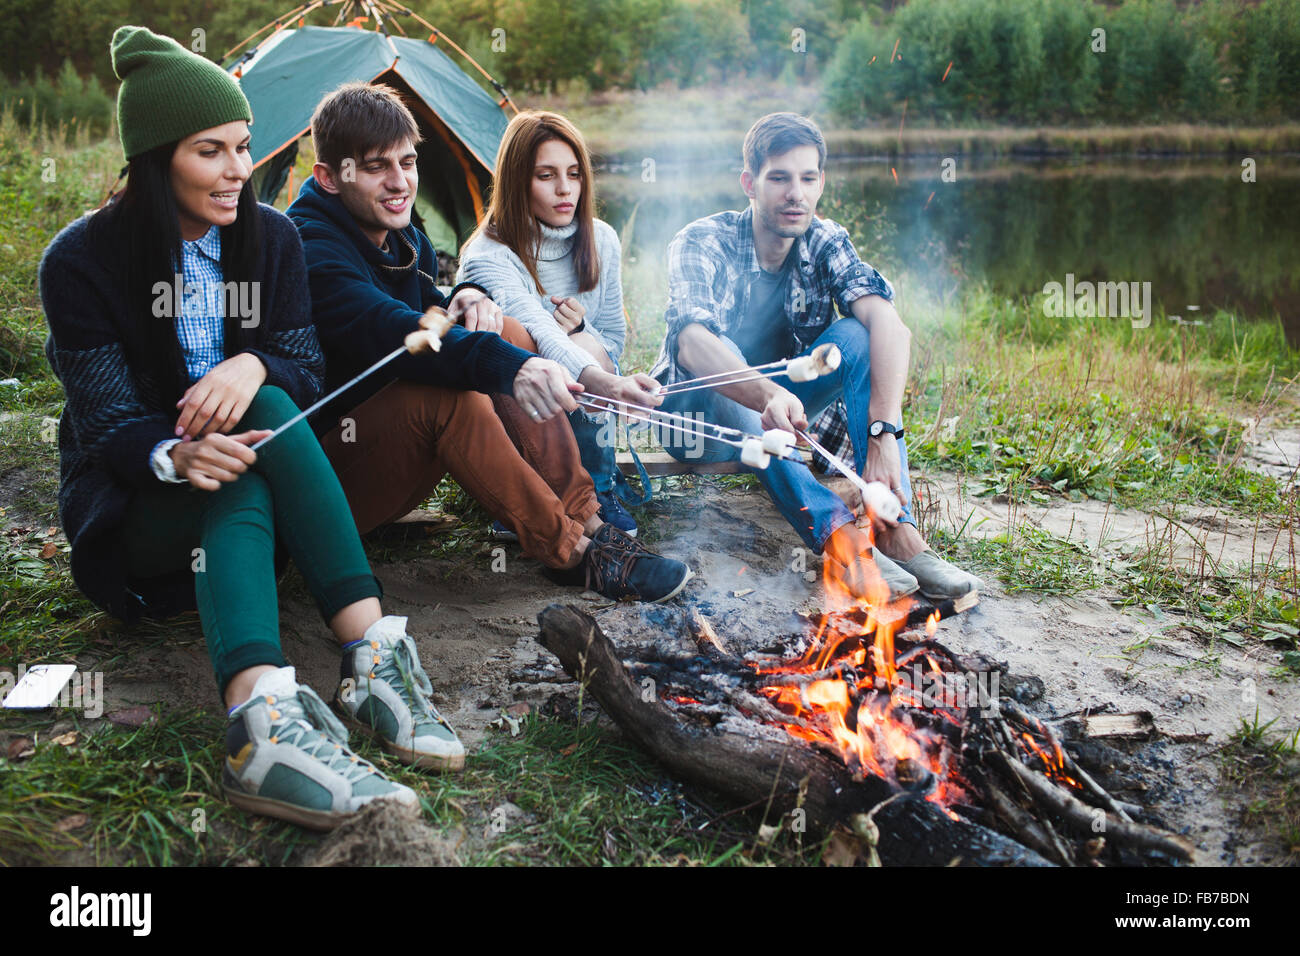 Friends roasting marshmallows in forest Stock Photo